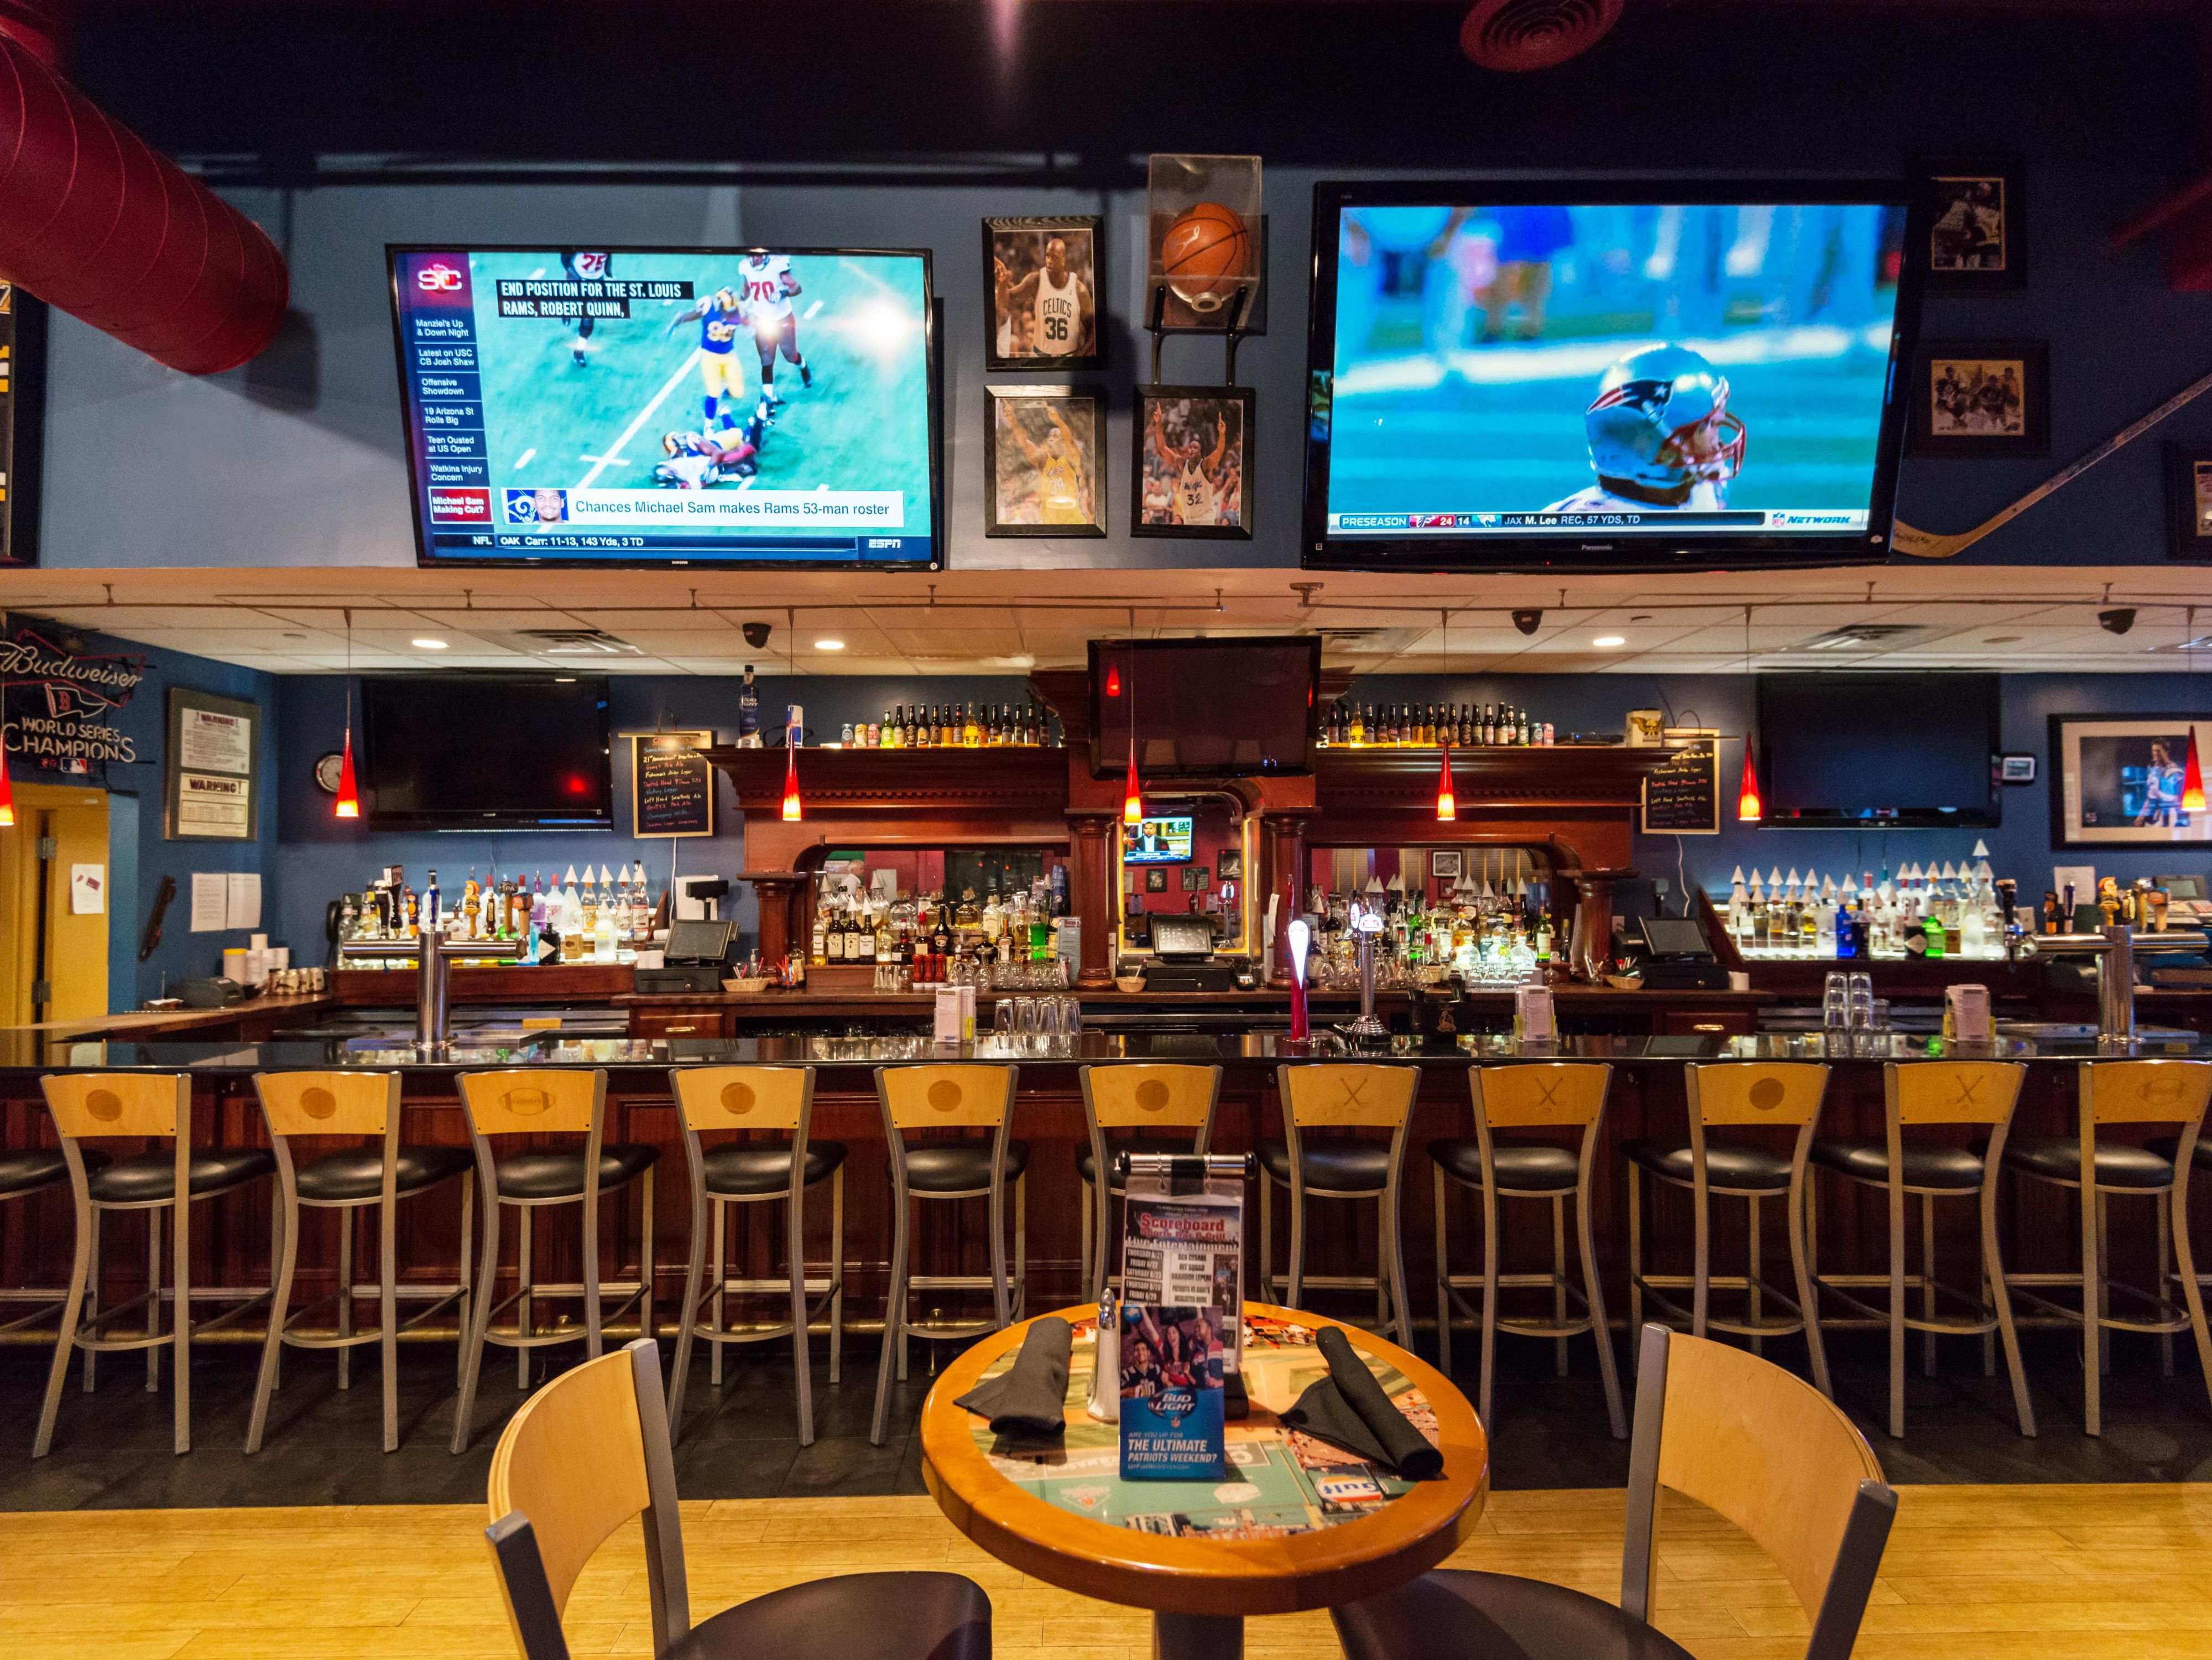 Located in the hotel, the Scoreboard is a true Boston Area sports bar and grill. A favorite place for North of Boston area fans to watch the New England Patriots, the Boston Red Sox, the Bruins and the Celtics games. We are now open 7 days a week for breakfast, lunch and dinner.  We also have Keno machines and live bands Friday and Saturday nights.